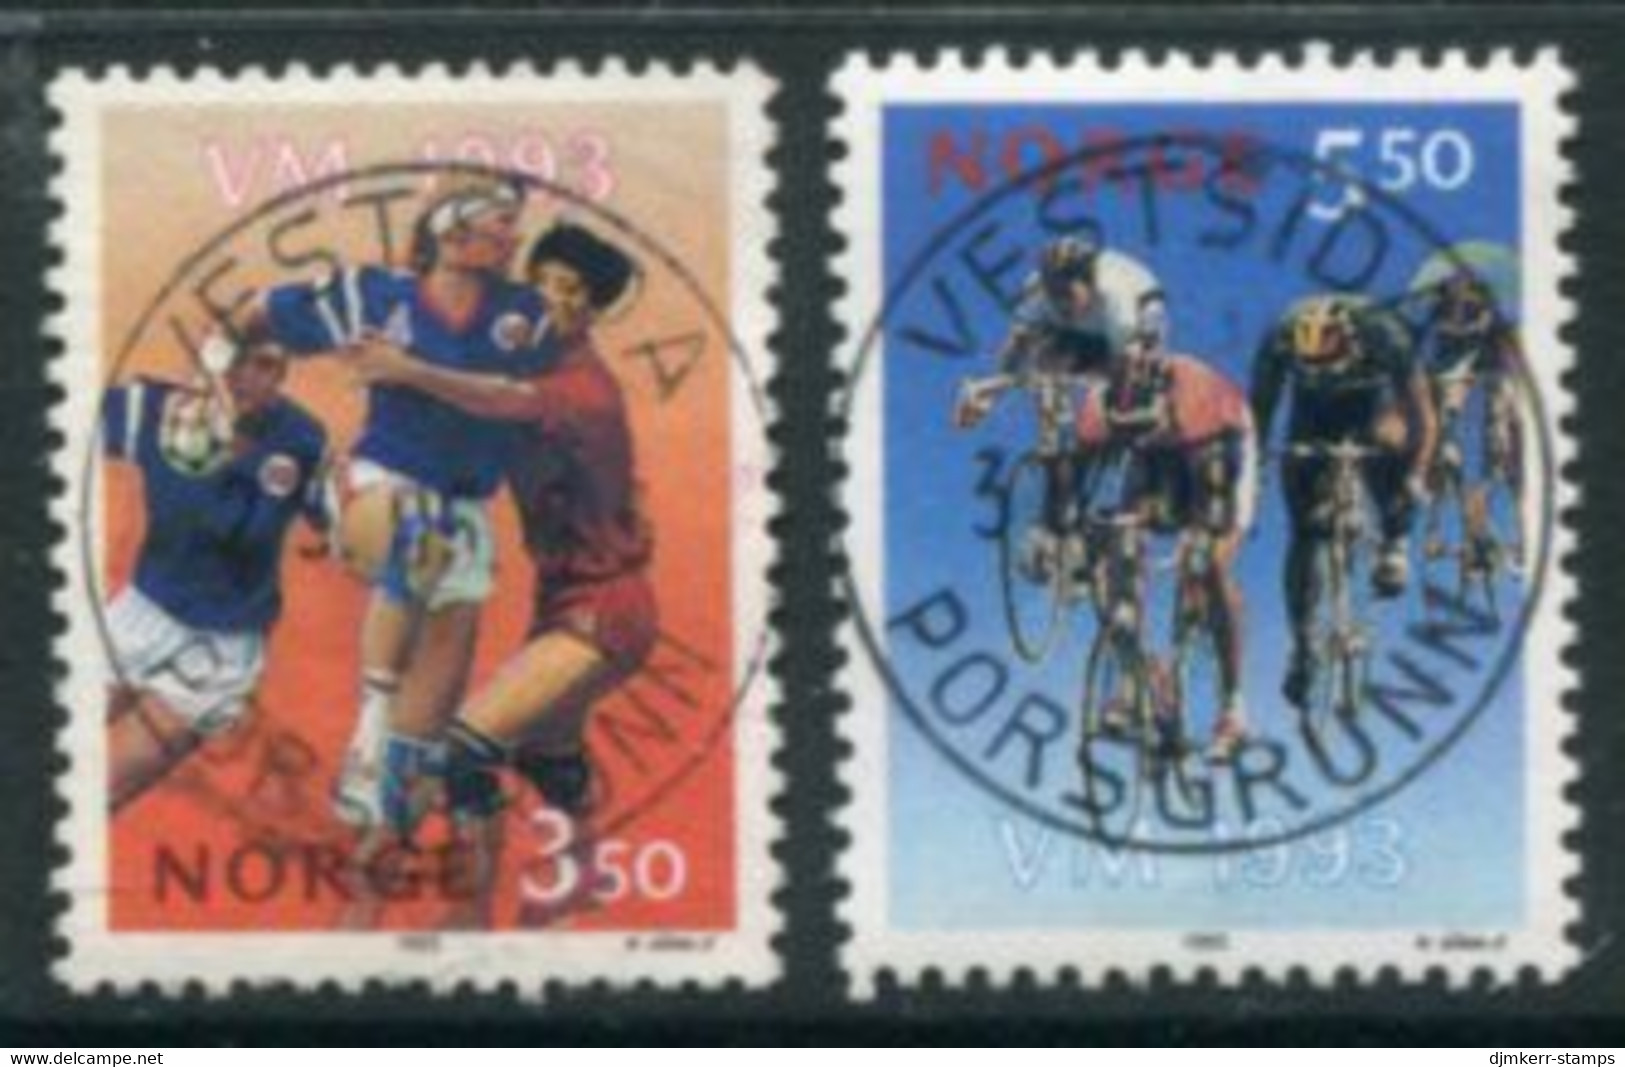 NORWAY 1993 Sports Championships Used   Michel 1129-30 - Oblitérés